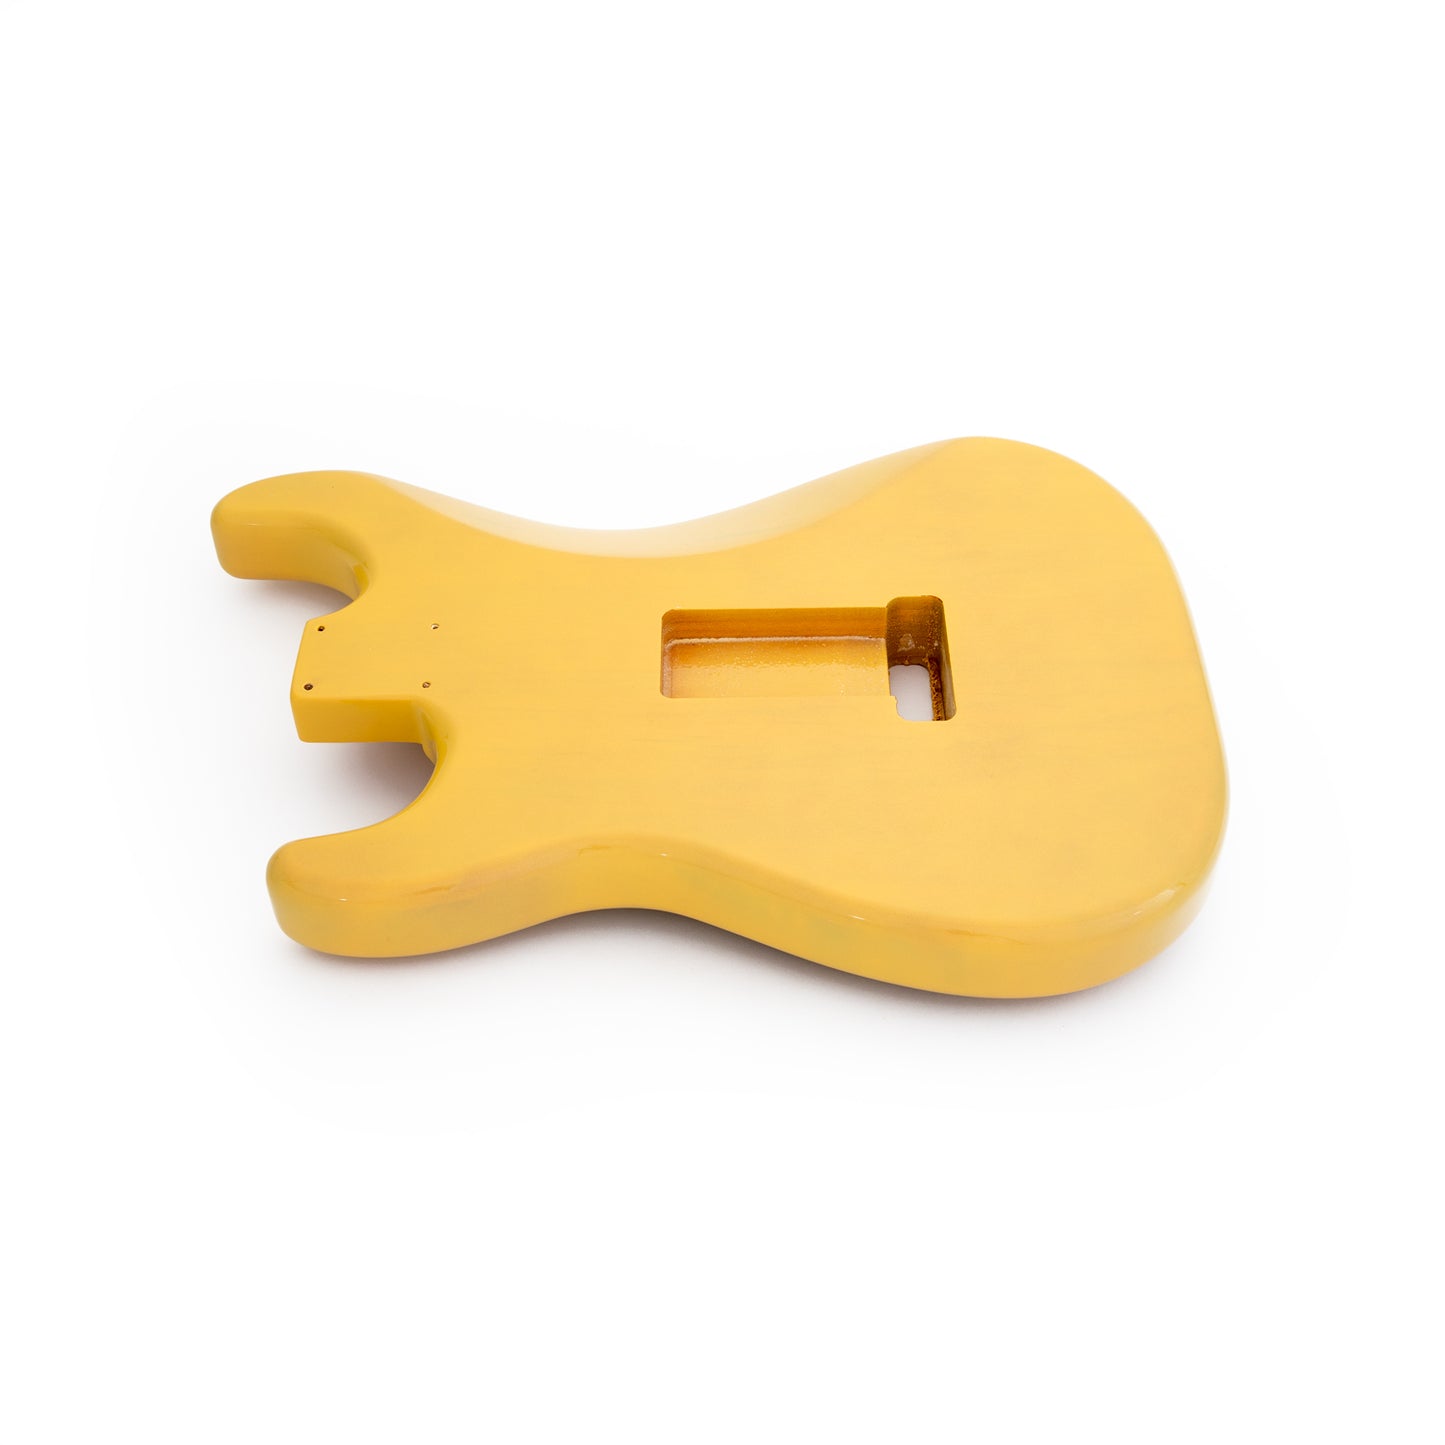 AE Guitars® S-Style Alder Replacement Guitar Body Butterscotch Blonde